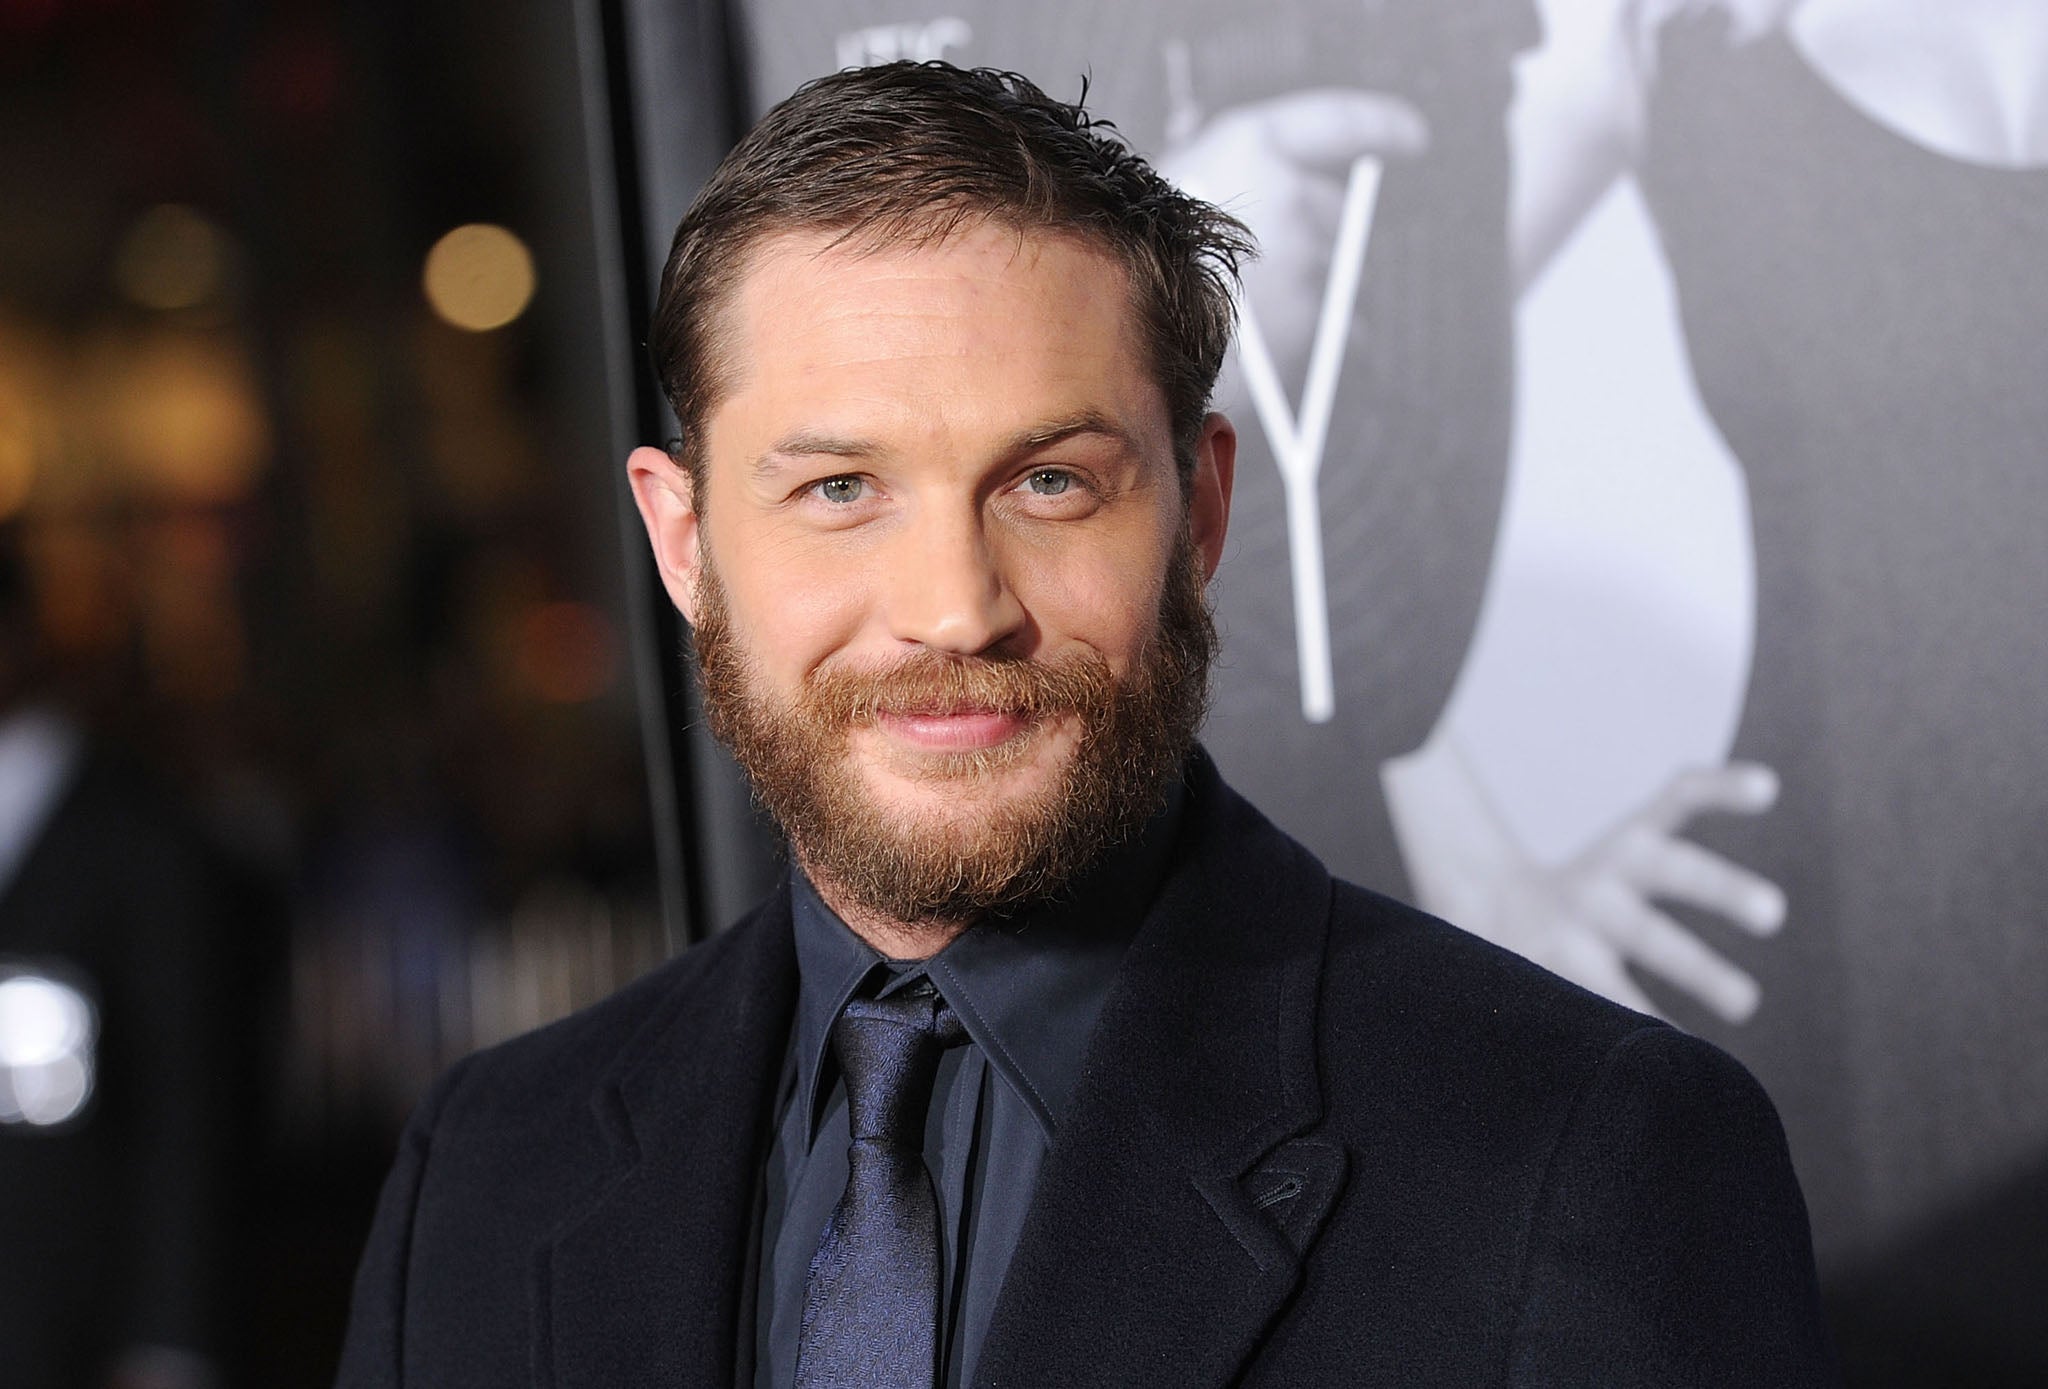 Tom Hardy will star in a new Ridley Scott drama for BBC One